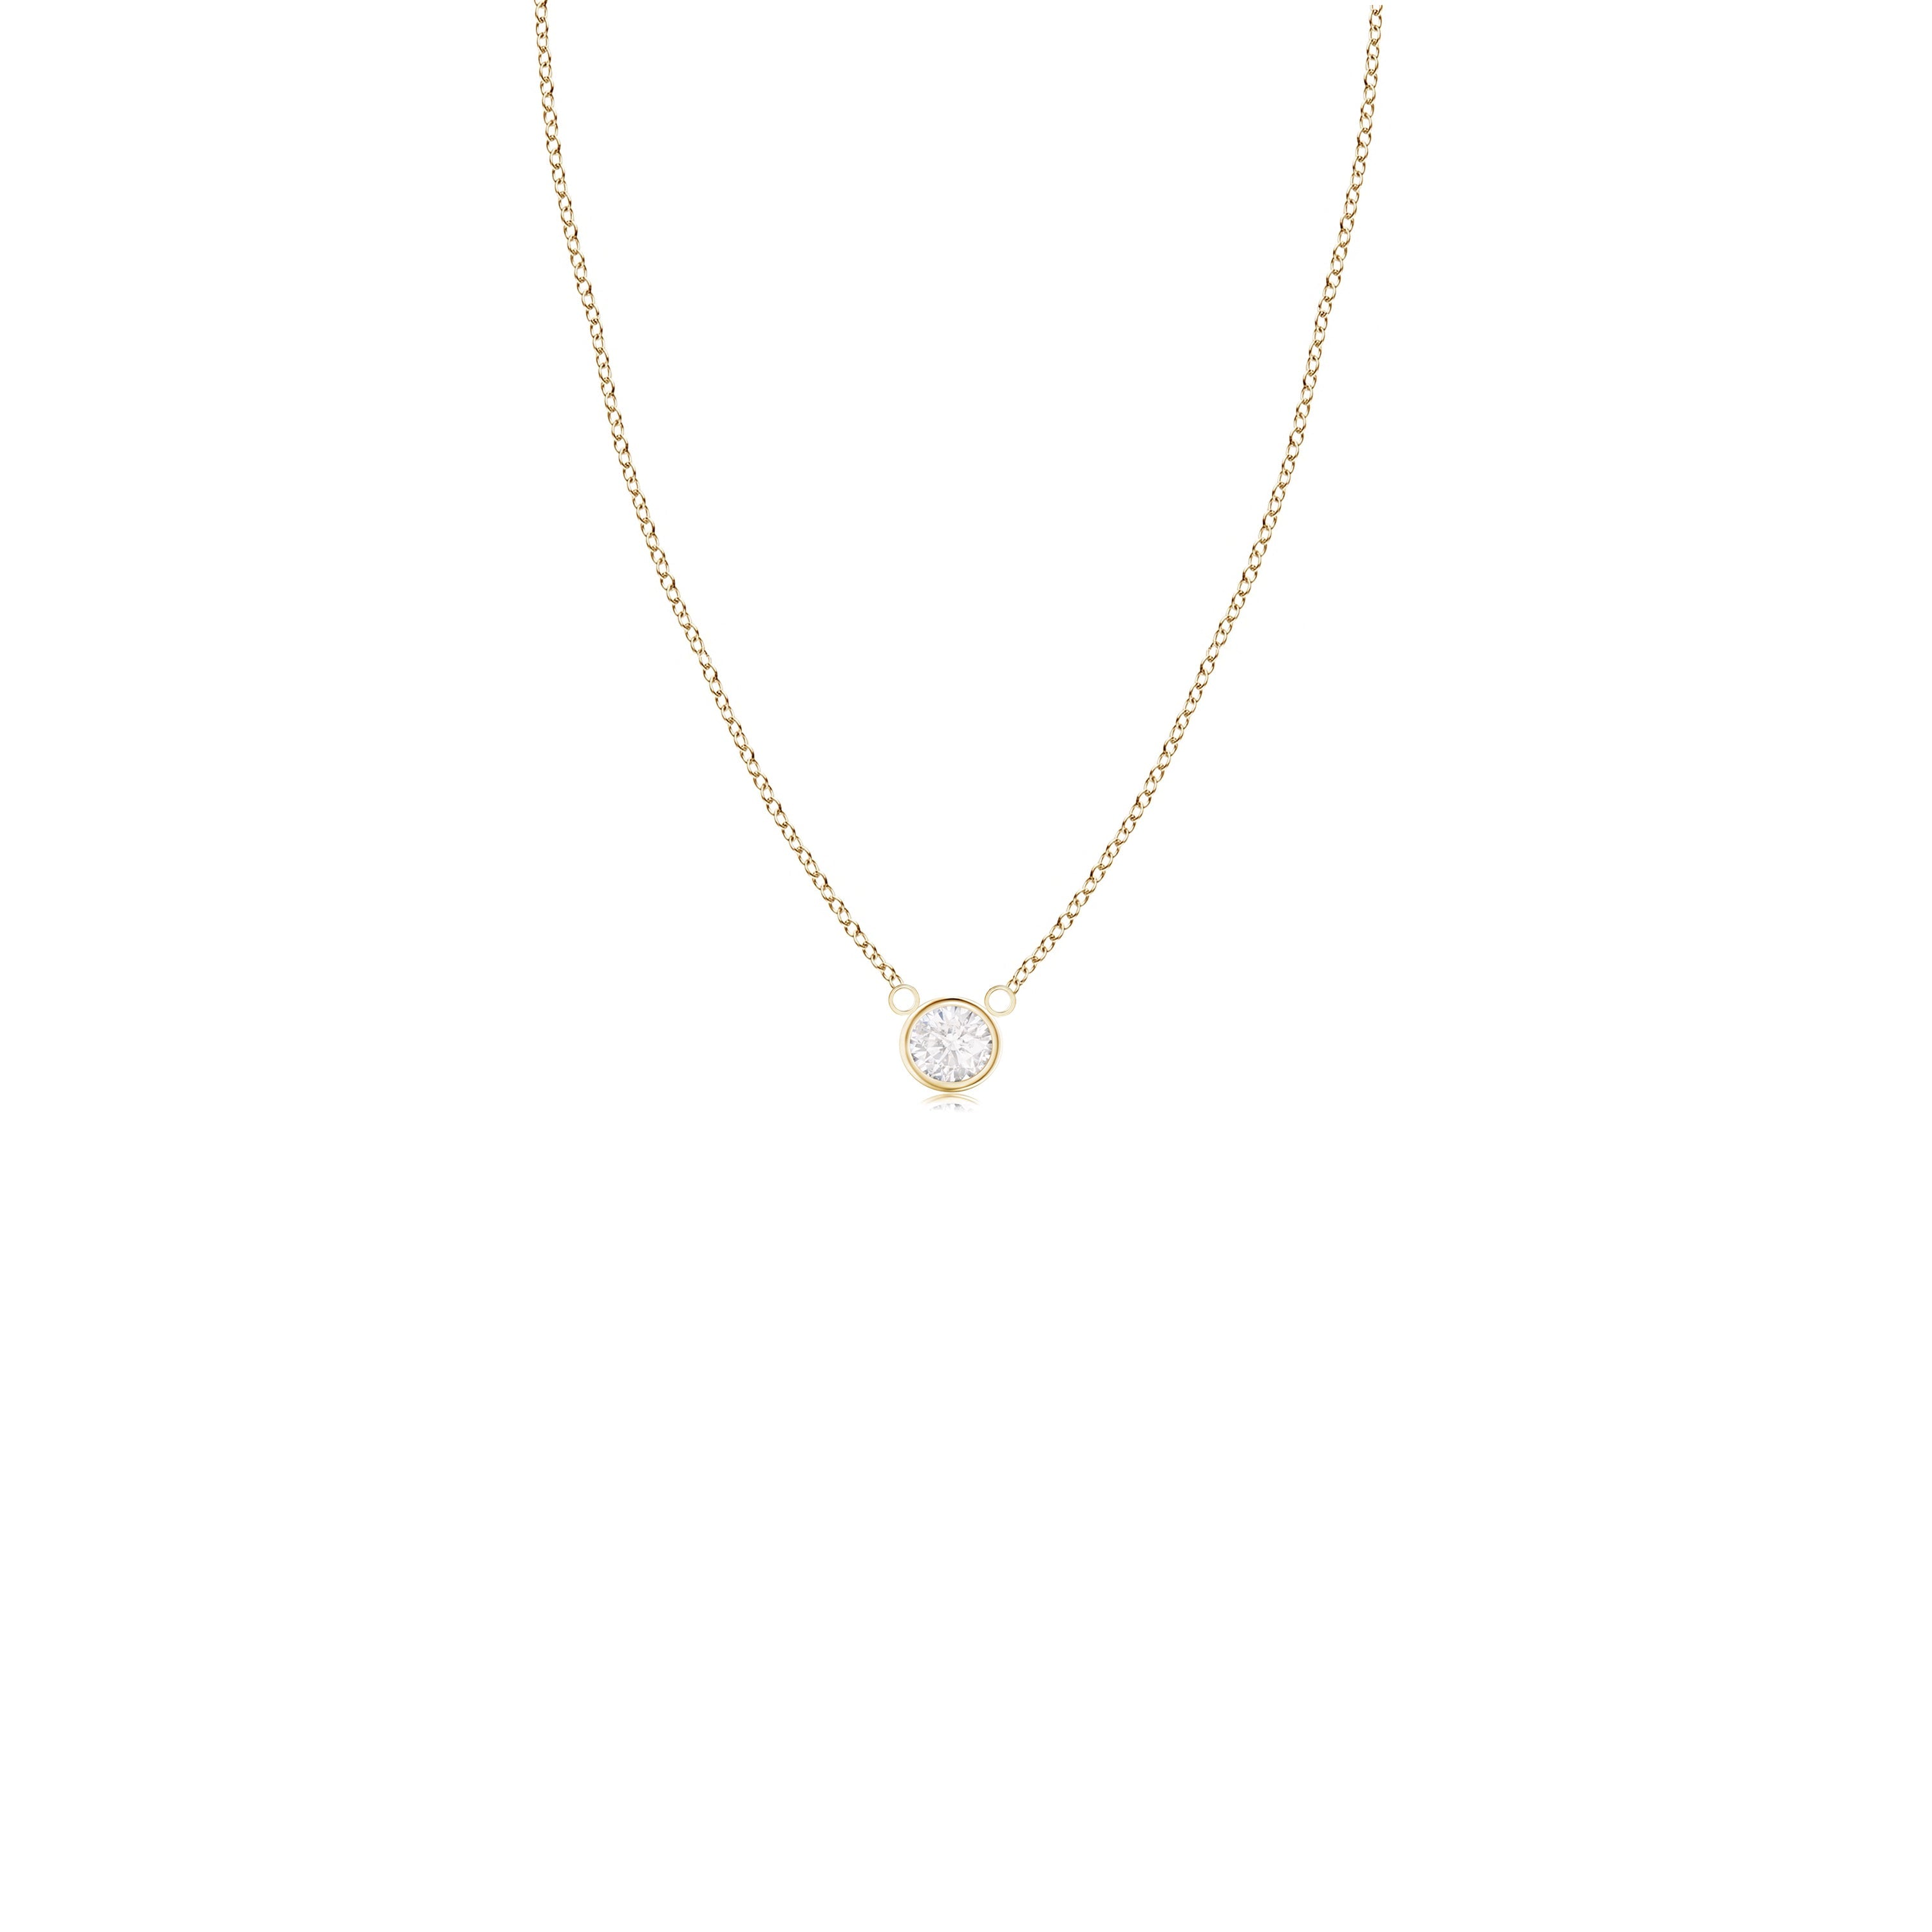 14k 6mm Gold Diamond Necklace by S.Carter Designs